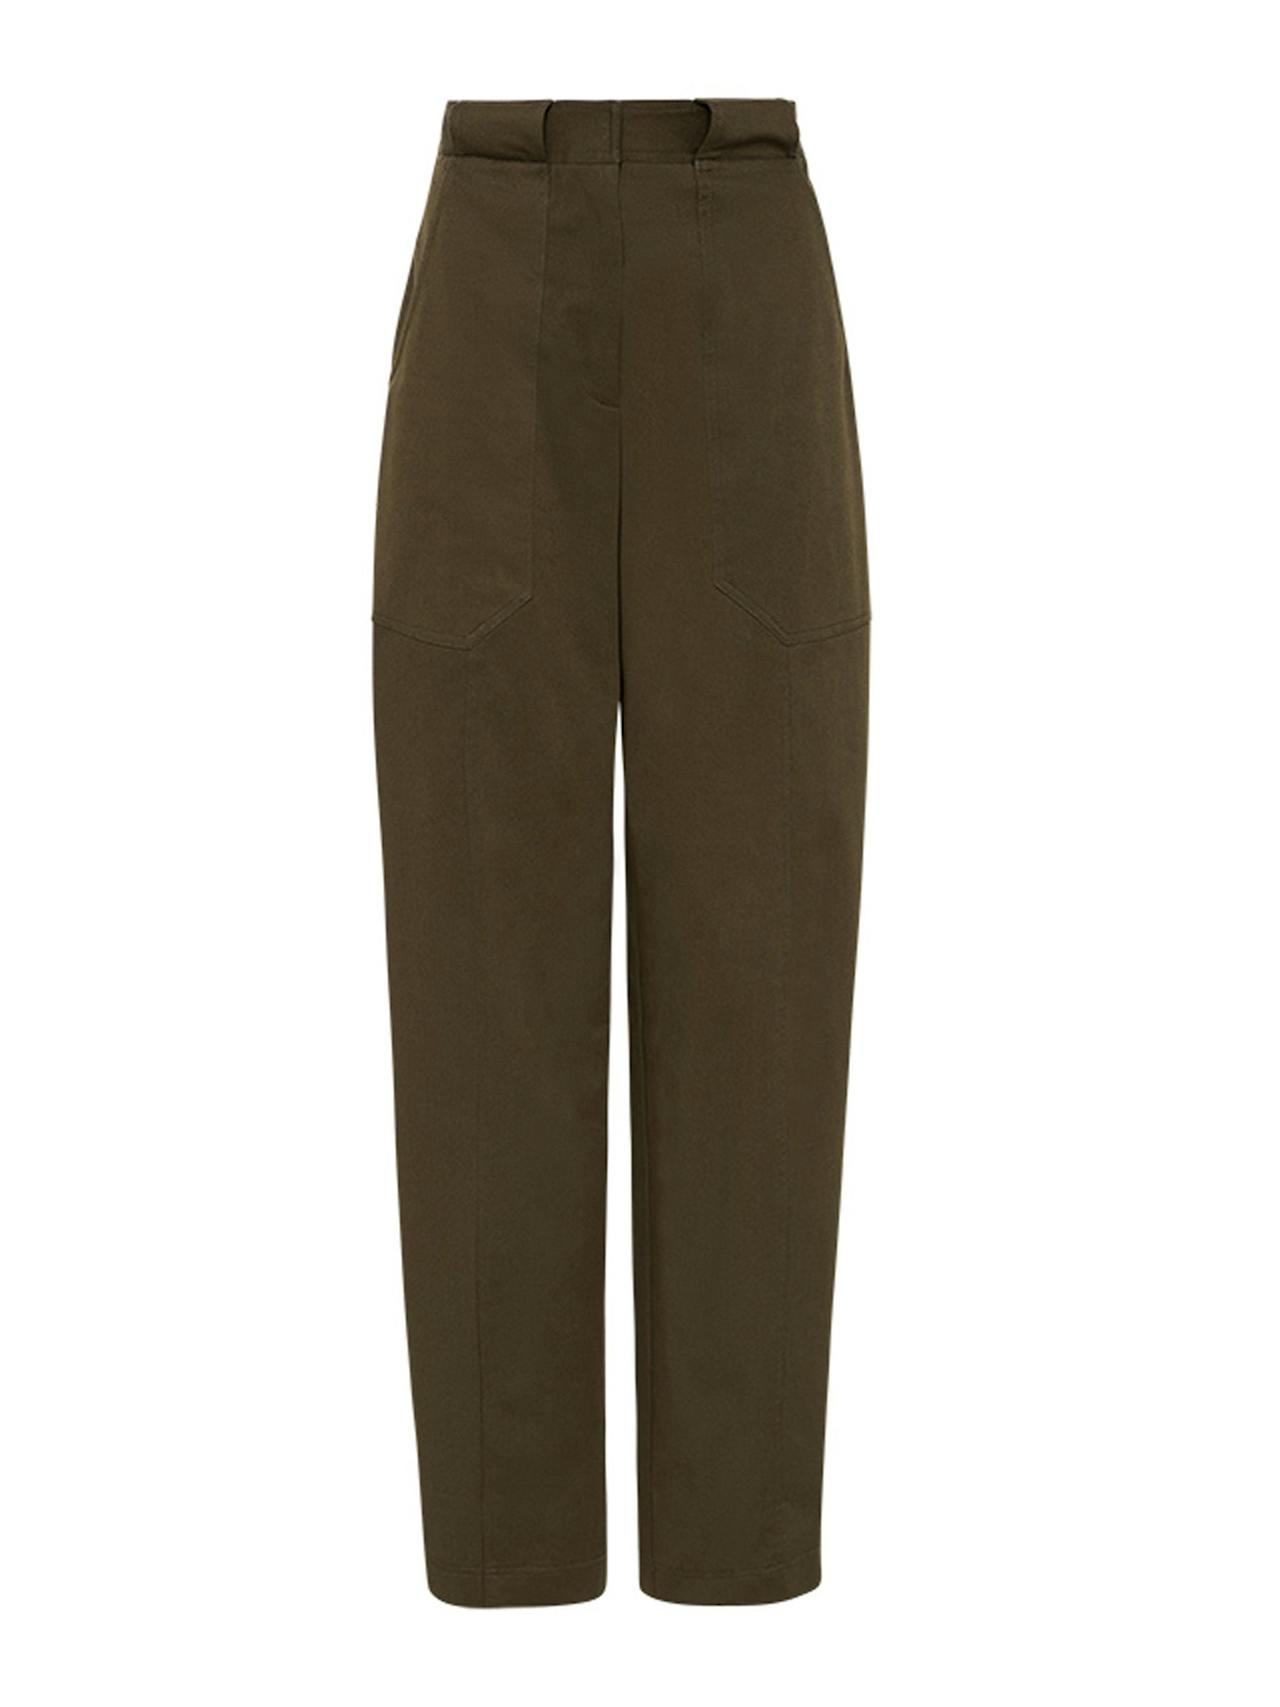 Olive utility trousers